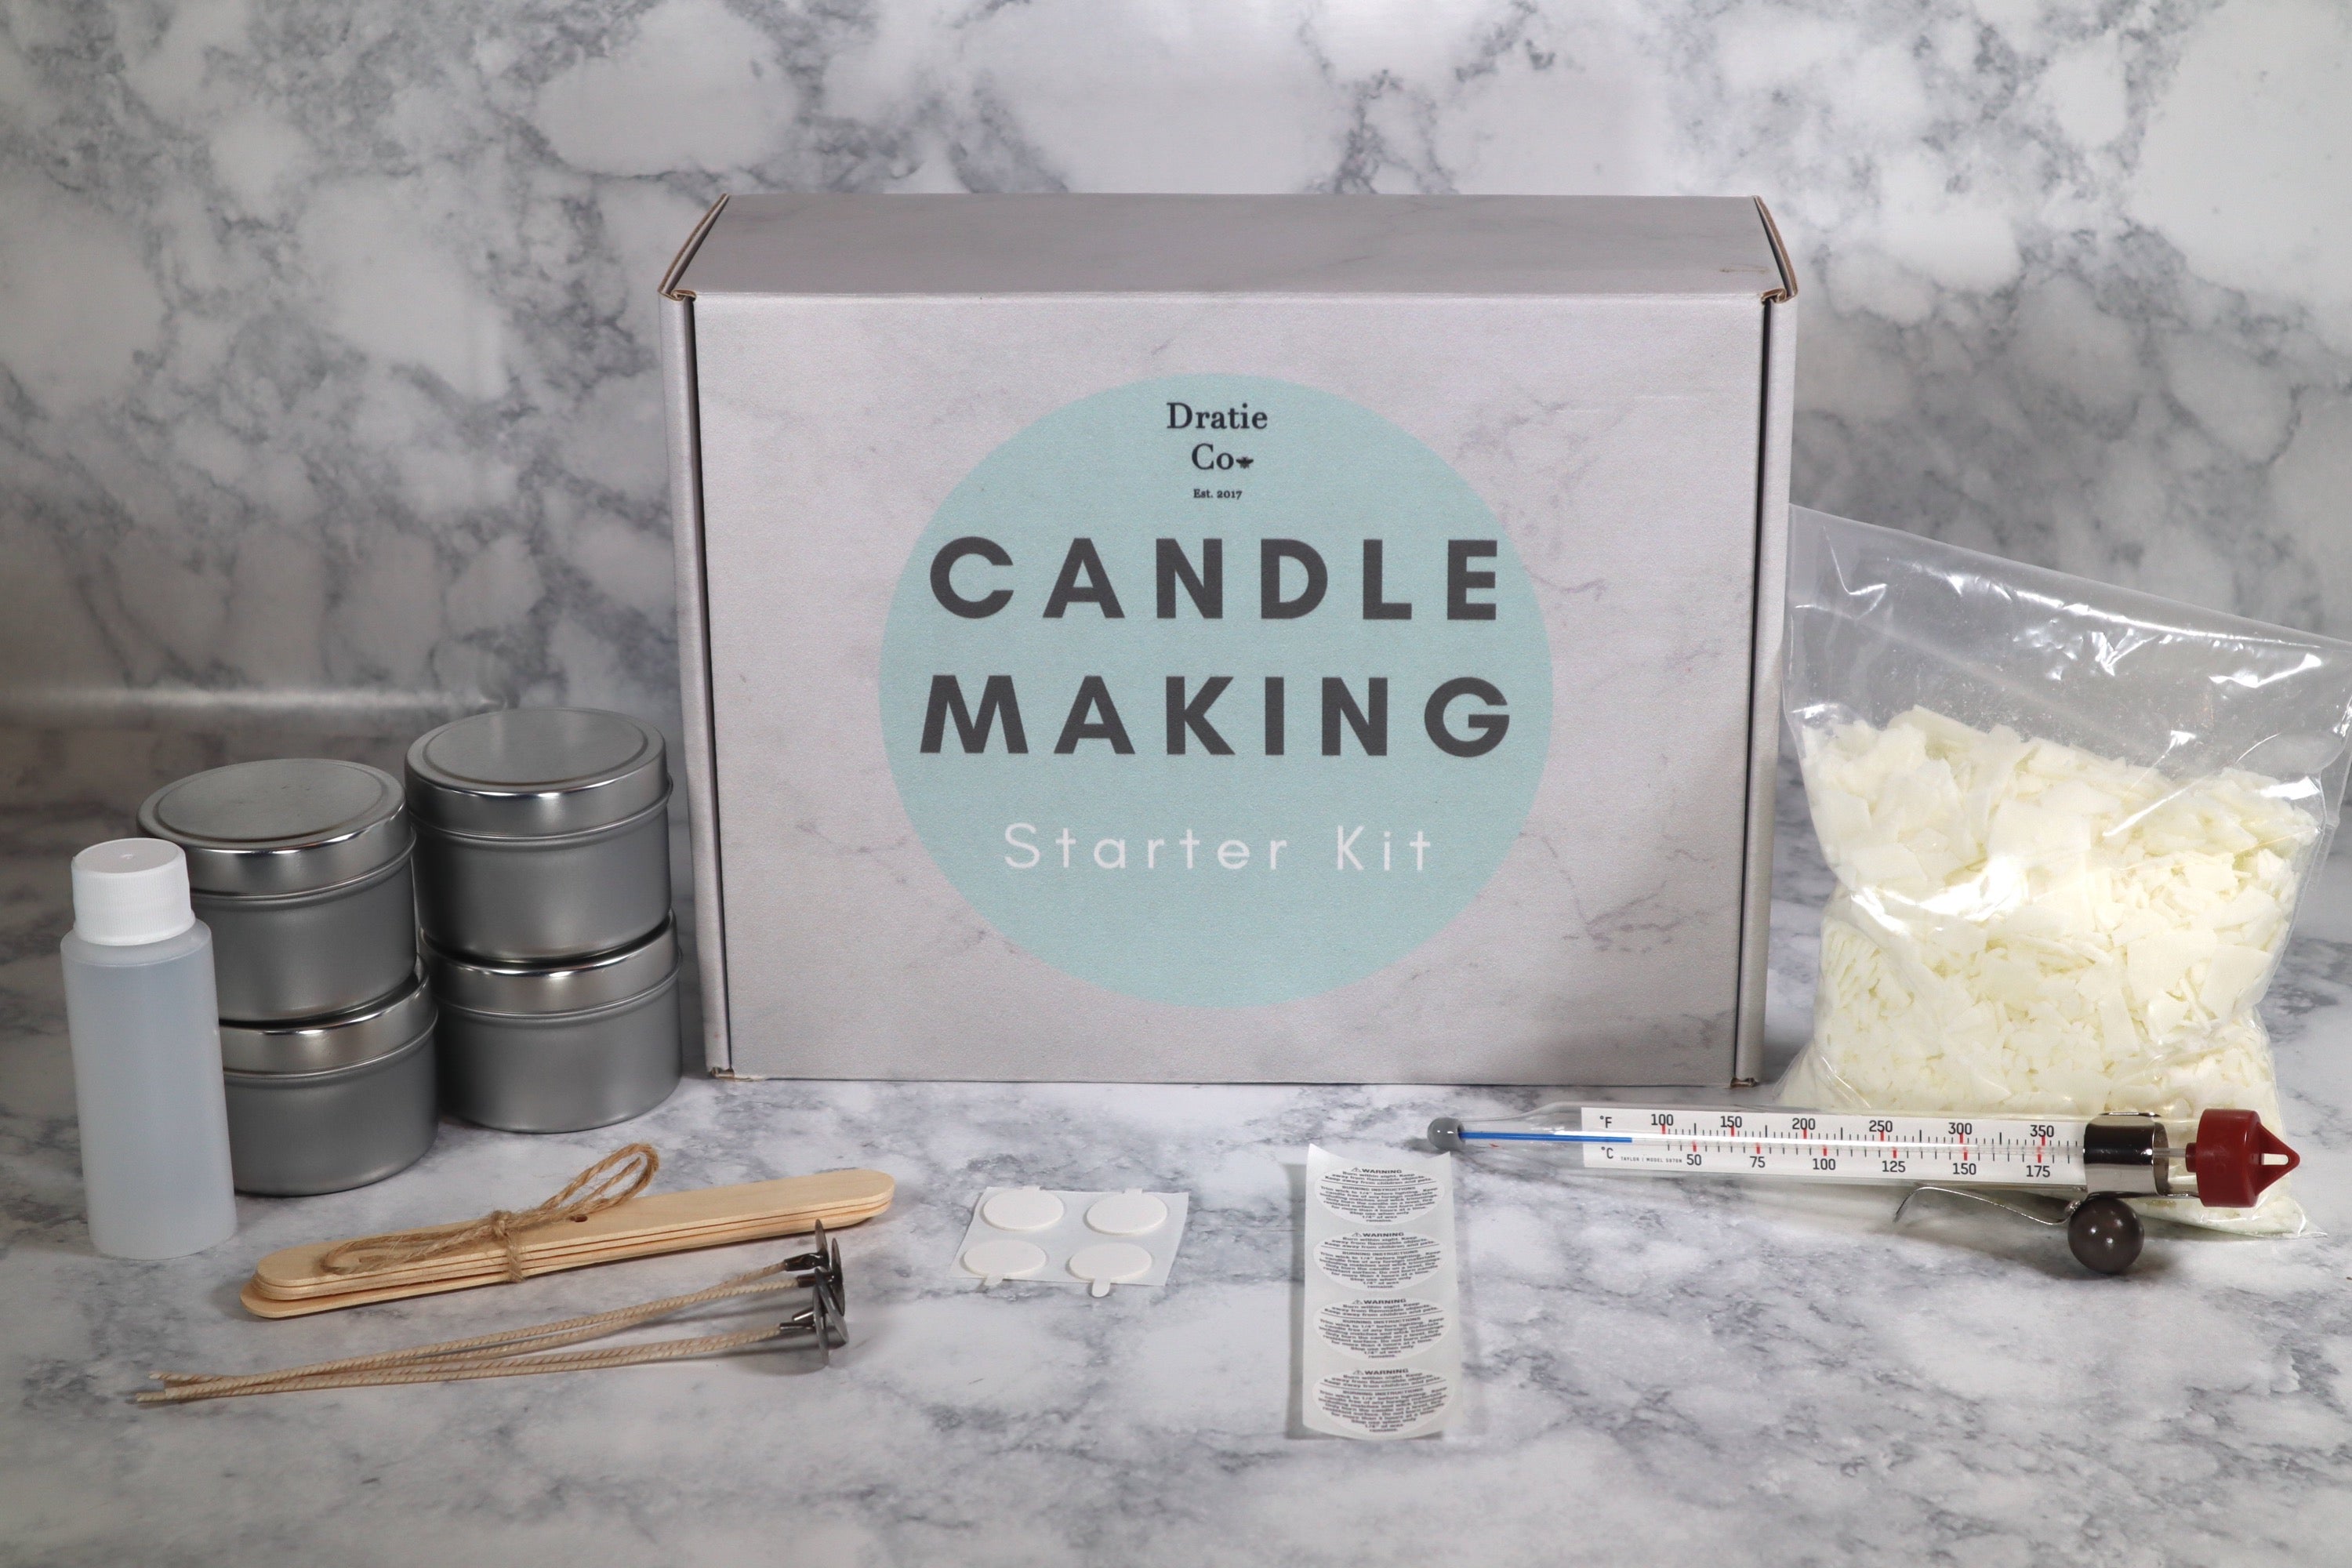 Complete Candle Making Kit